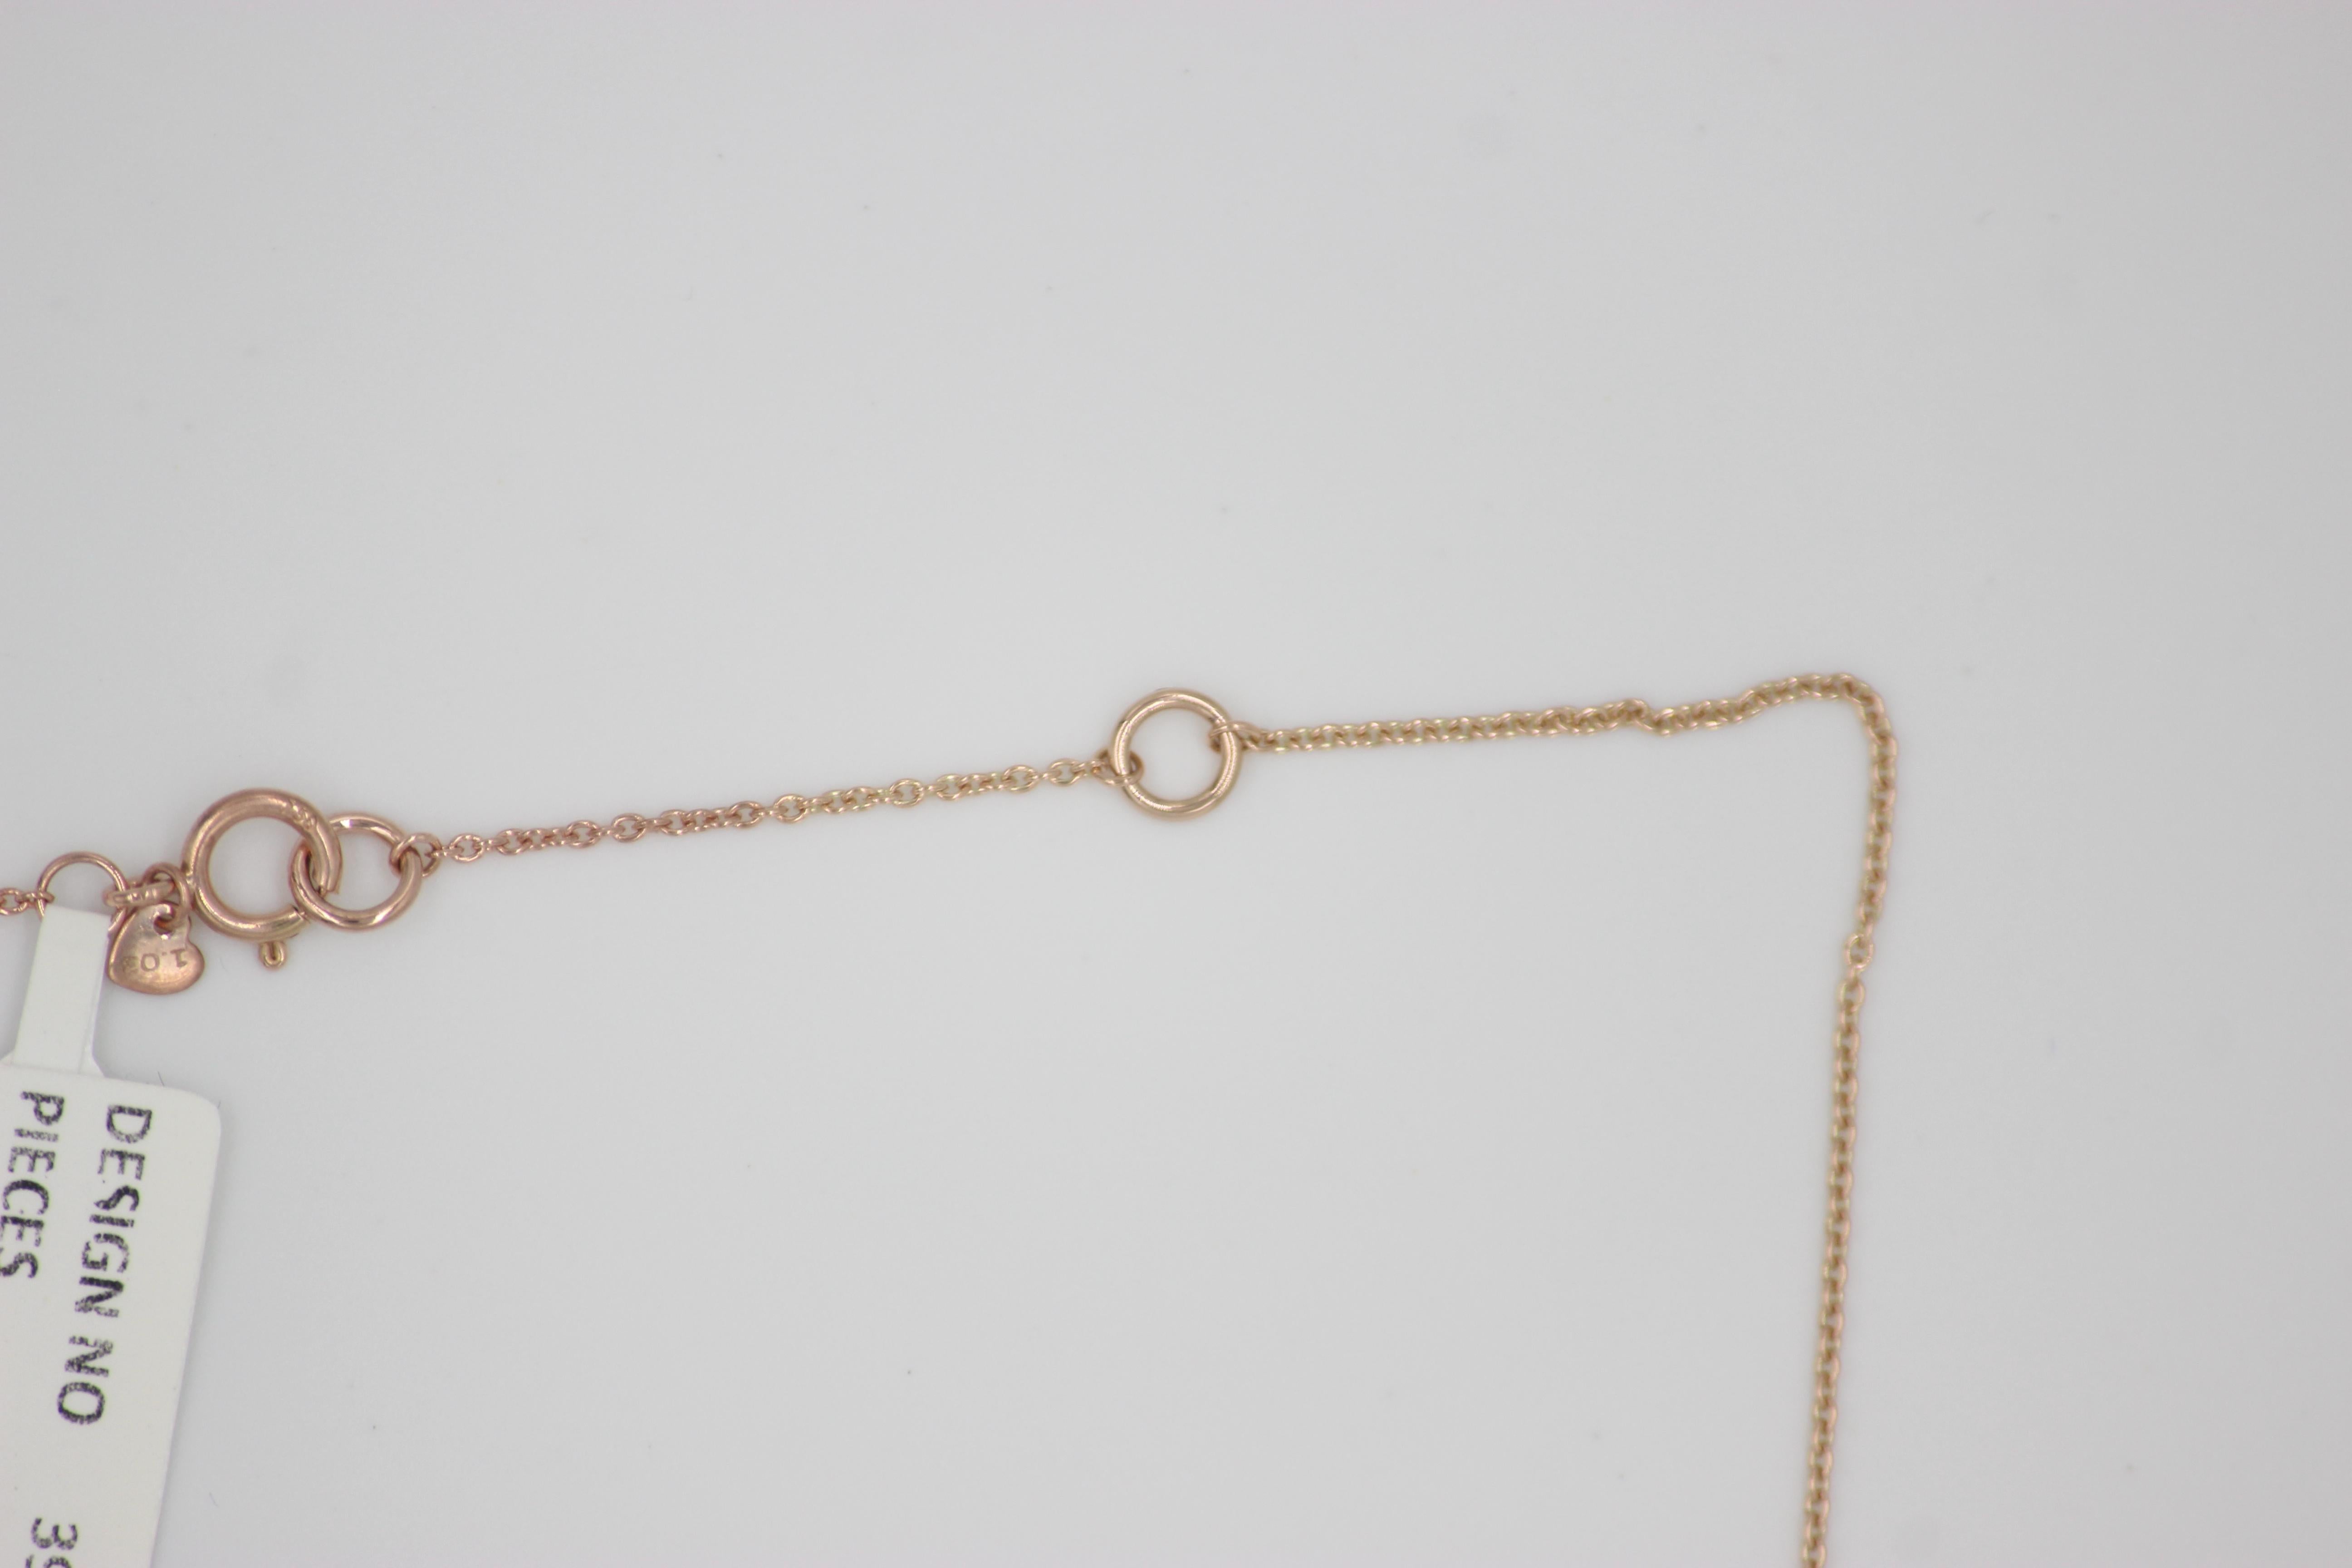 This Panim Danging Briolettes Necklace is made of 18K Rose gold with 1.03 ctw of diamonds.  

This piece is handcrafted and manufactured by Panim. All of the diamonds are hand-set by a master diamond setter in the highest quality craftsmanship. This